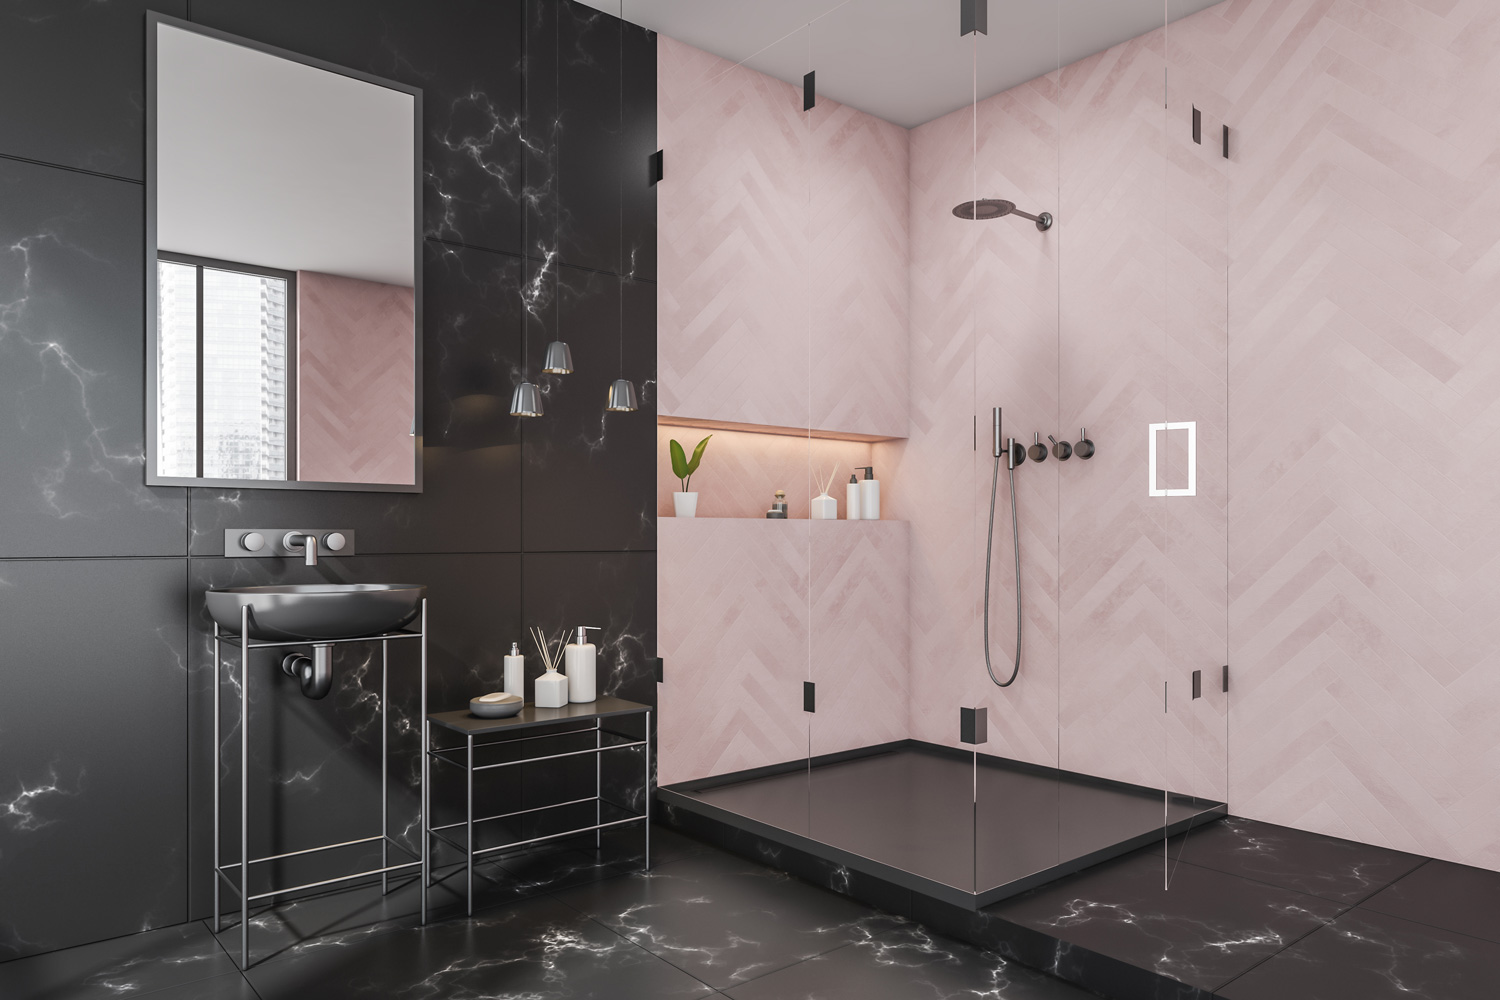 Corner of the shower room interior with a frame vanity unit, a pink area with a niche shelf, a mirror and three lights.